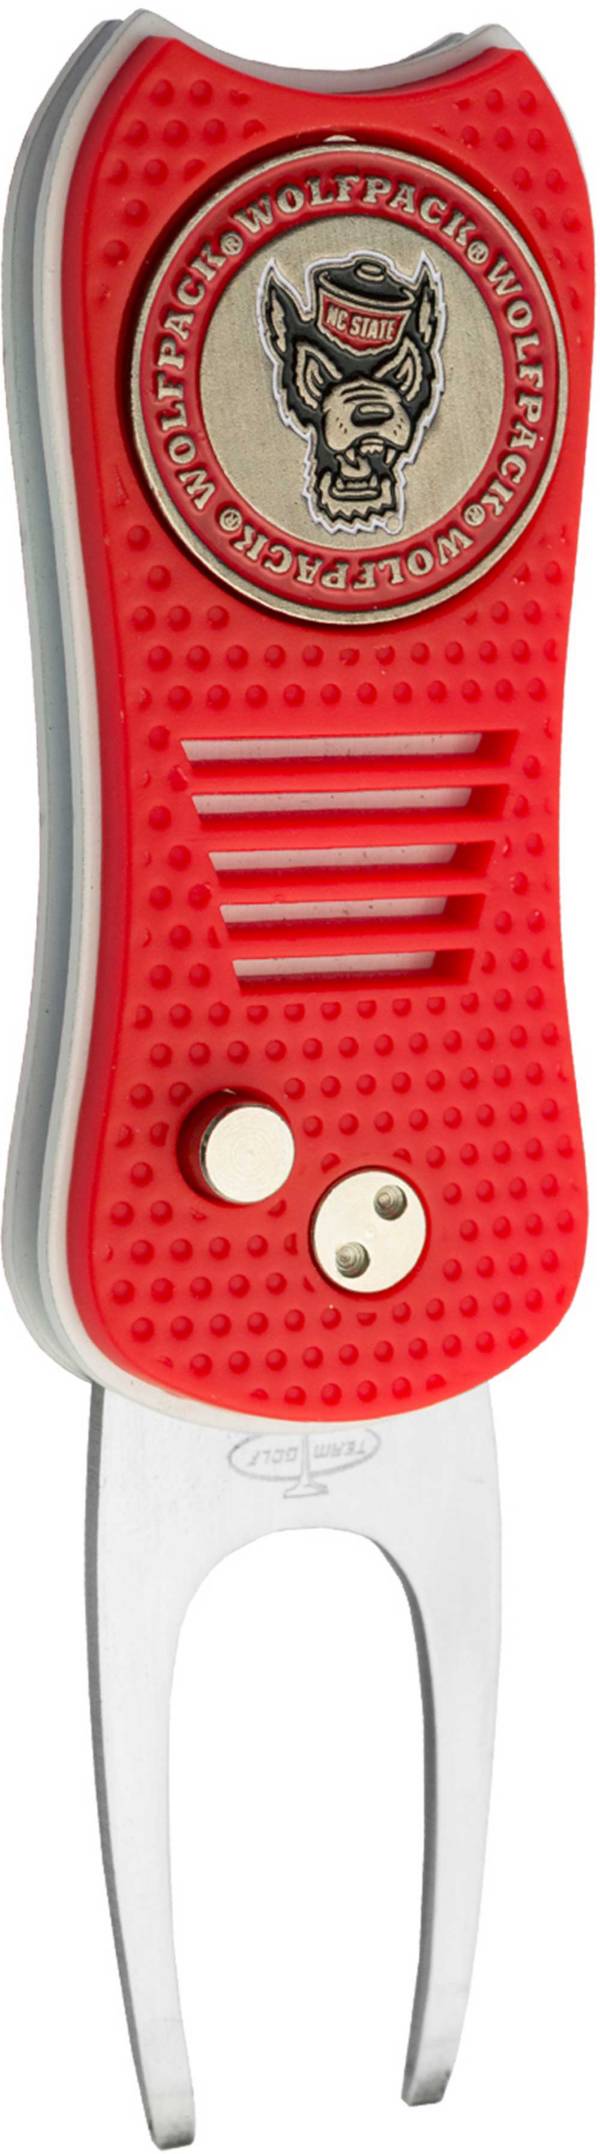 Team Golf Switchfix NC State Wolfpack Divot Tool product image